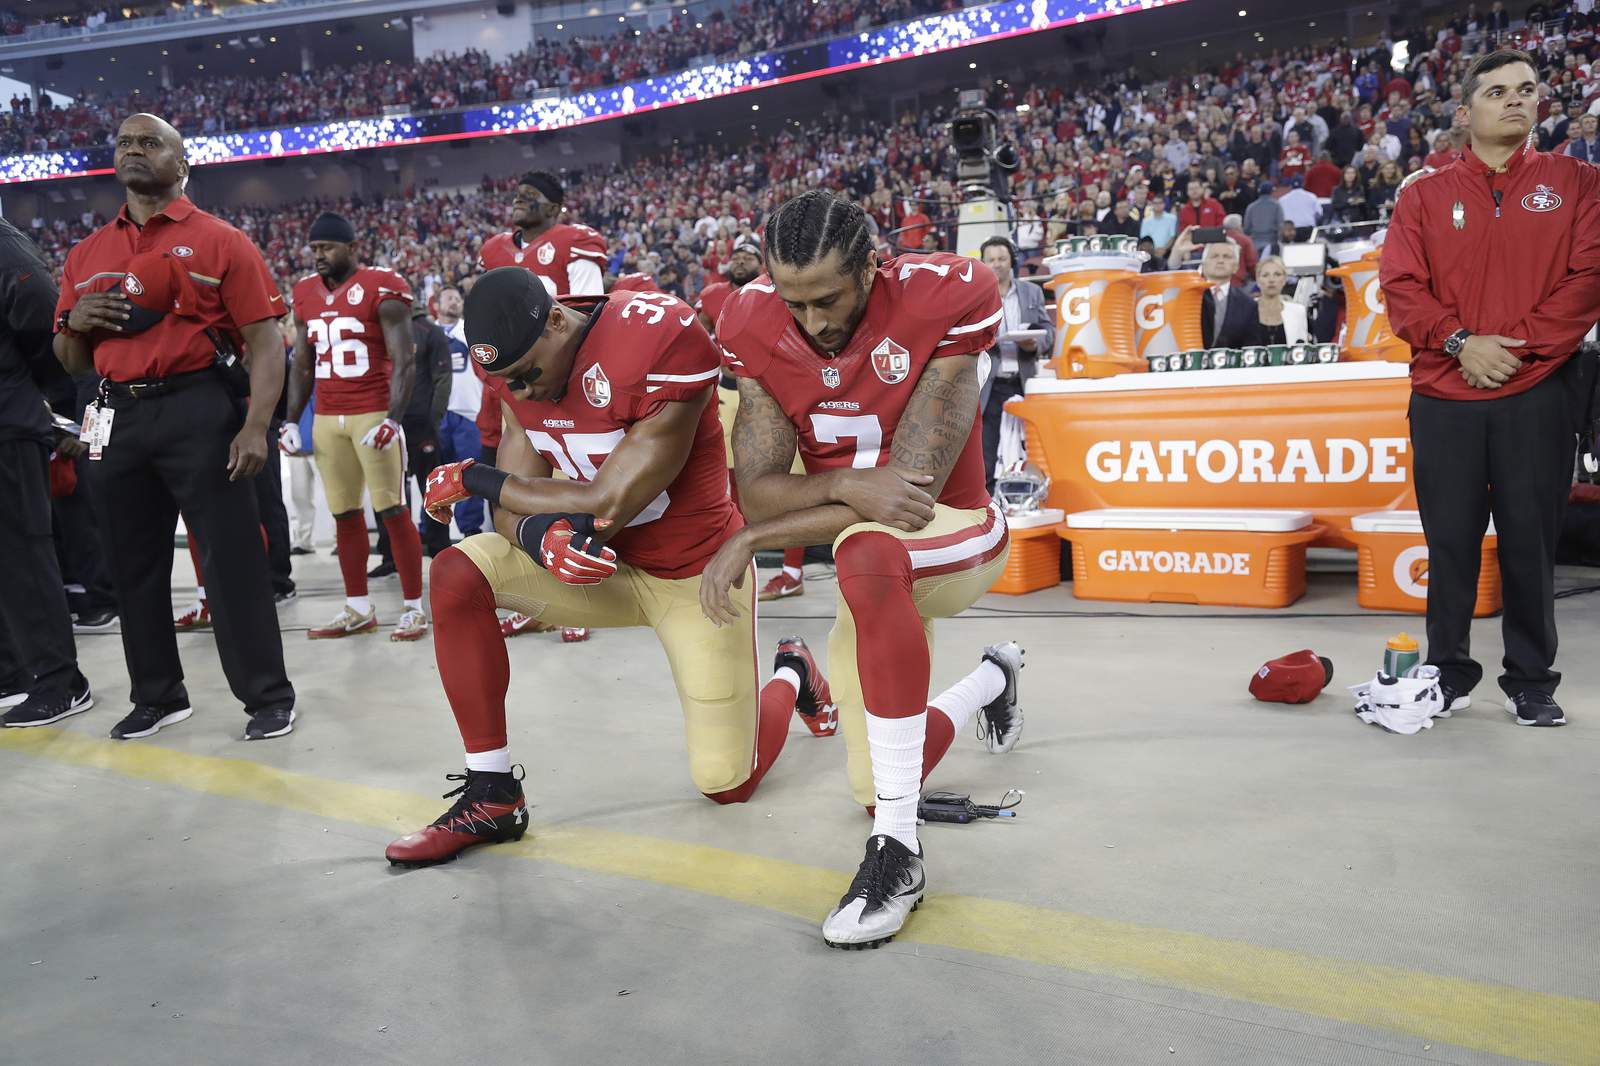 Change of heart. Most Americans now agree with Kaepernicks protest: poll